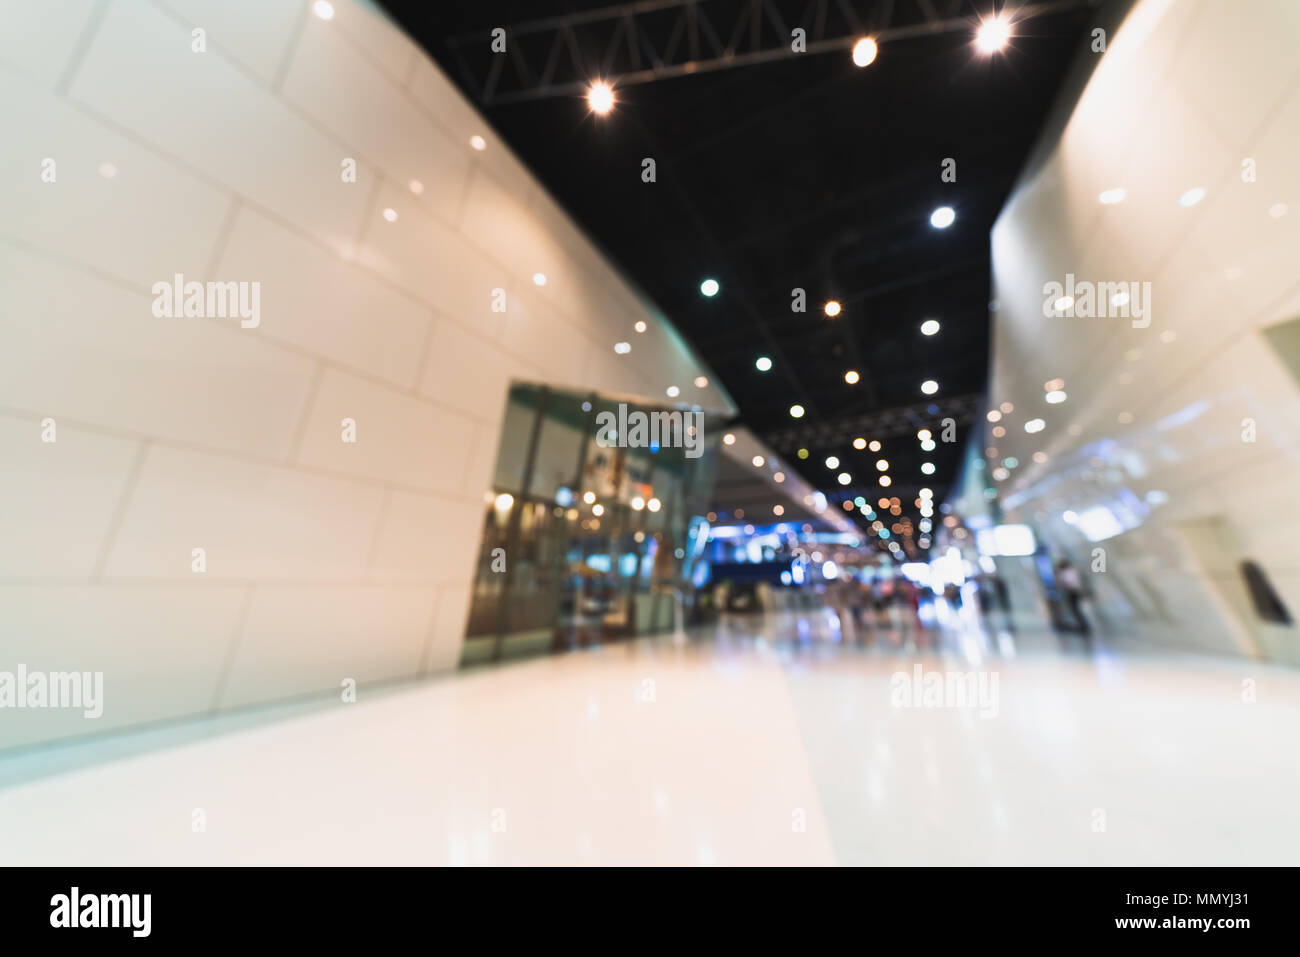 Public event exhibition hall, blurred bokeh defocused background. International business trade show, contemporary public building concept Stock Photo